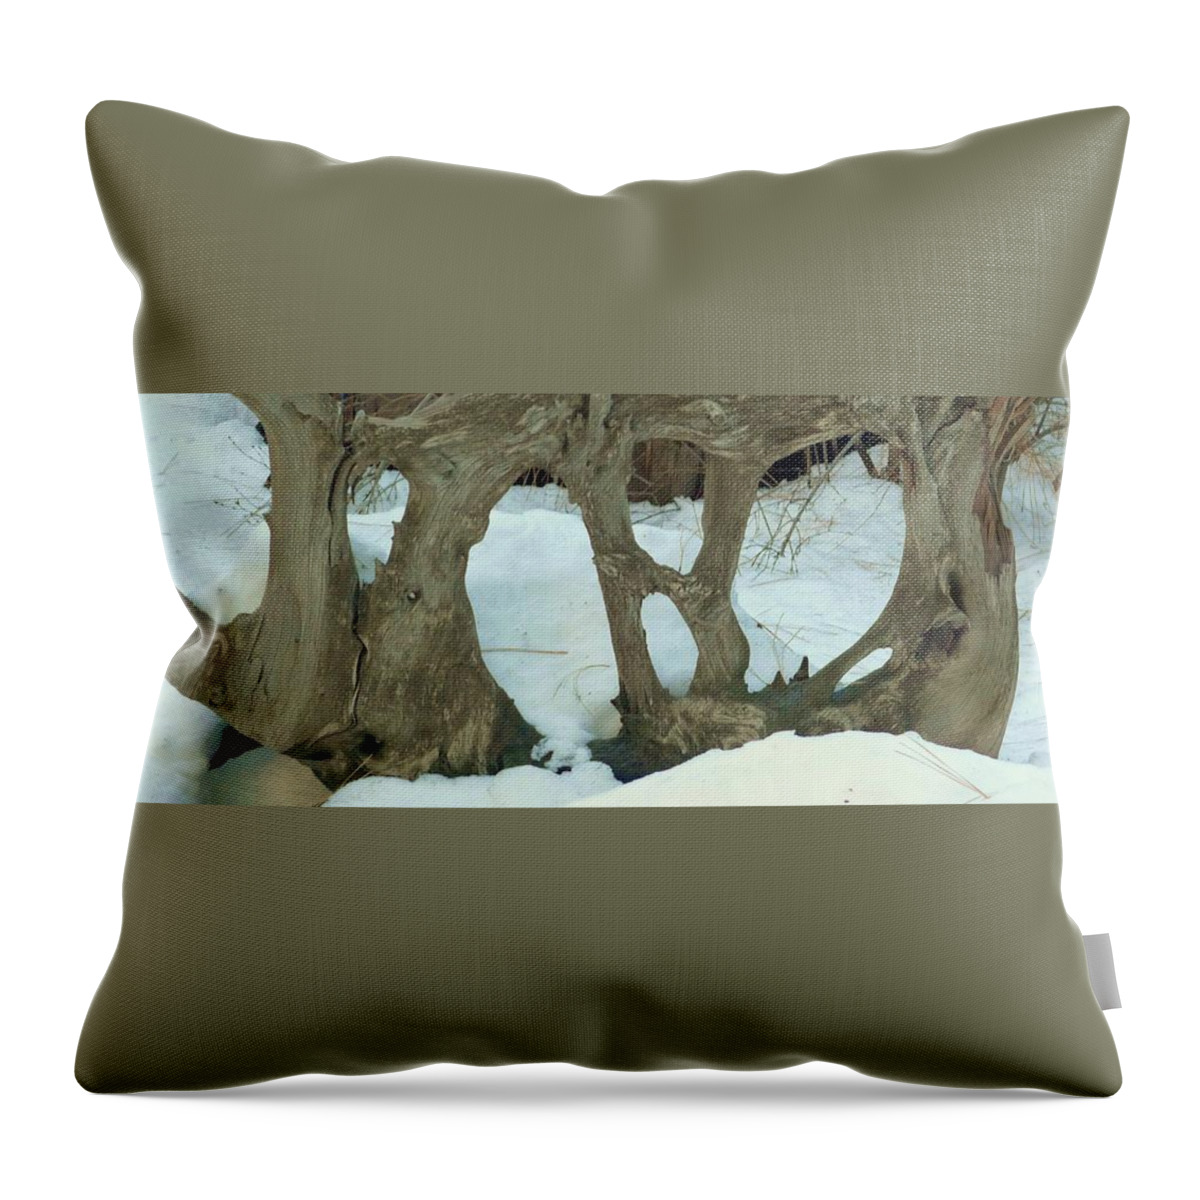 Idyllwild Throw Pillow featuring the photograph Idyllwild Tree Sculpture by Nora Boghossian